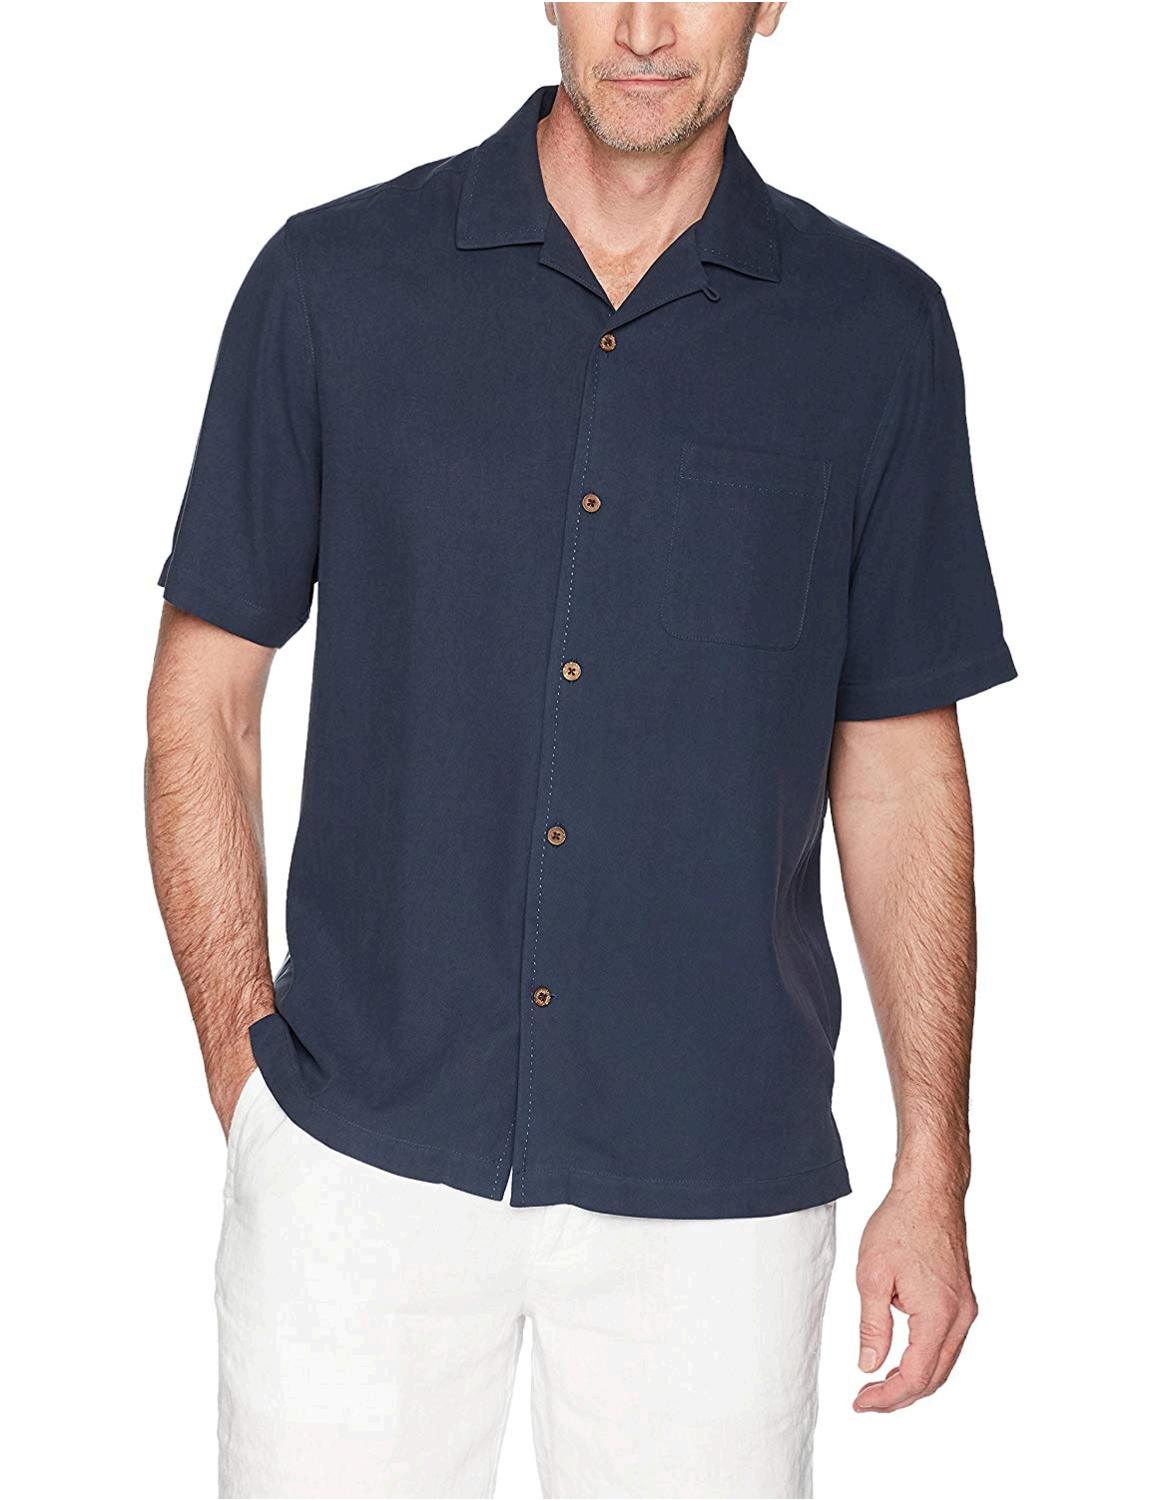 28 Palms Men's Relaxed-Fit 100% Silk Camp Shirt, Blue, Blue Night, Size